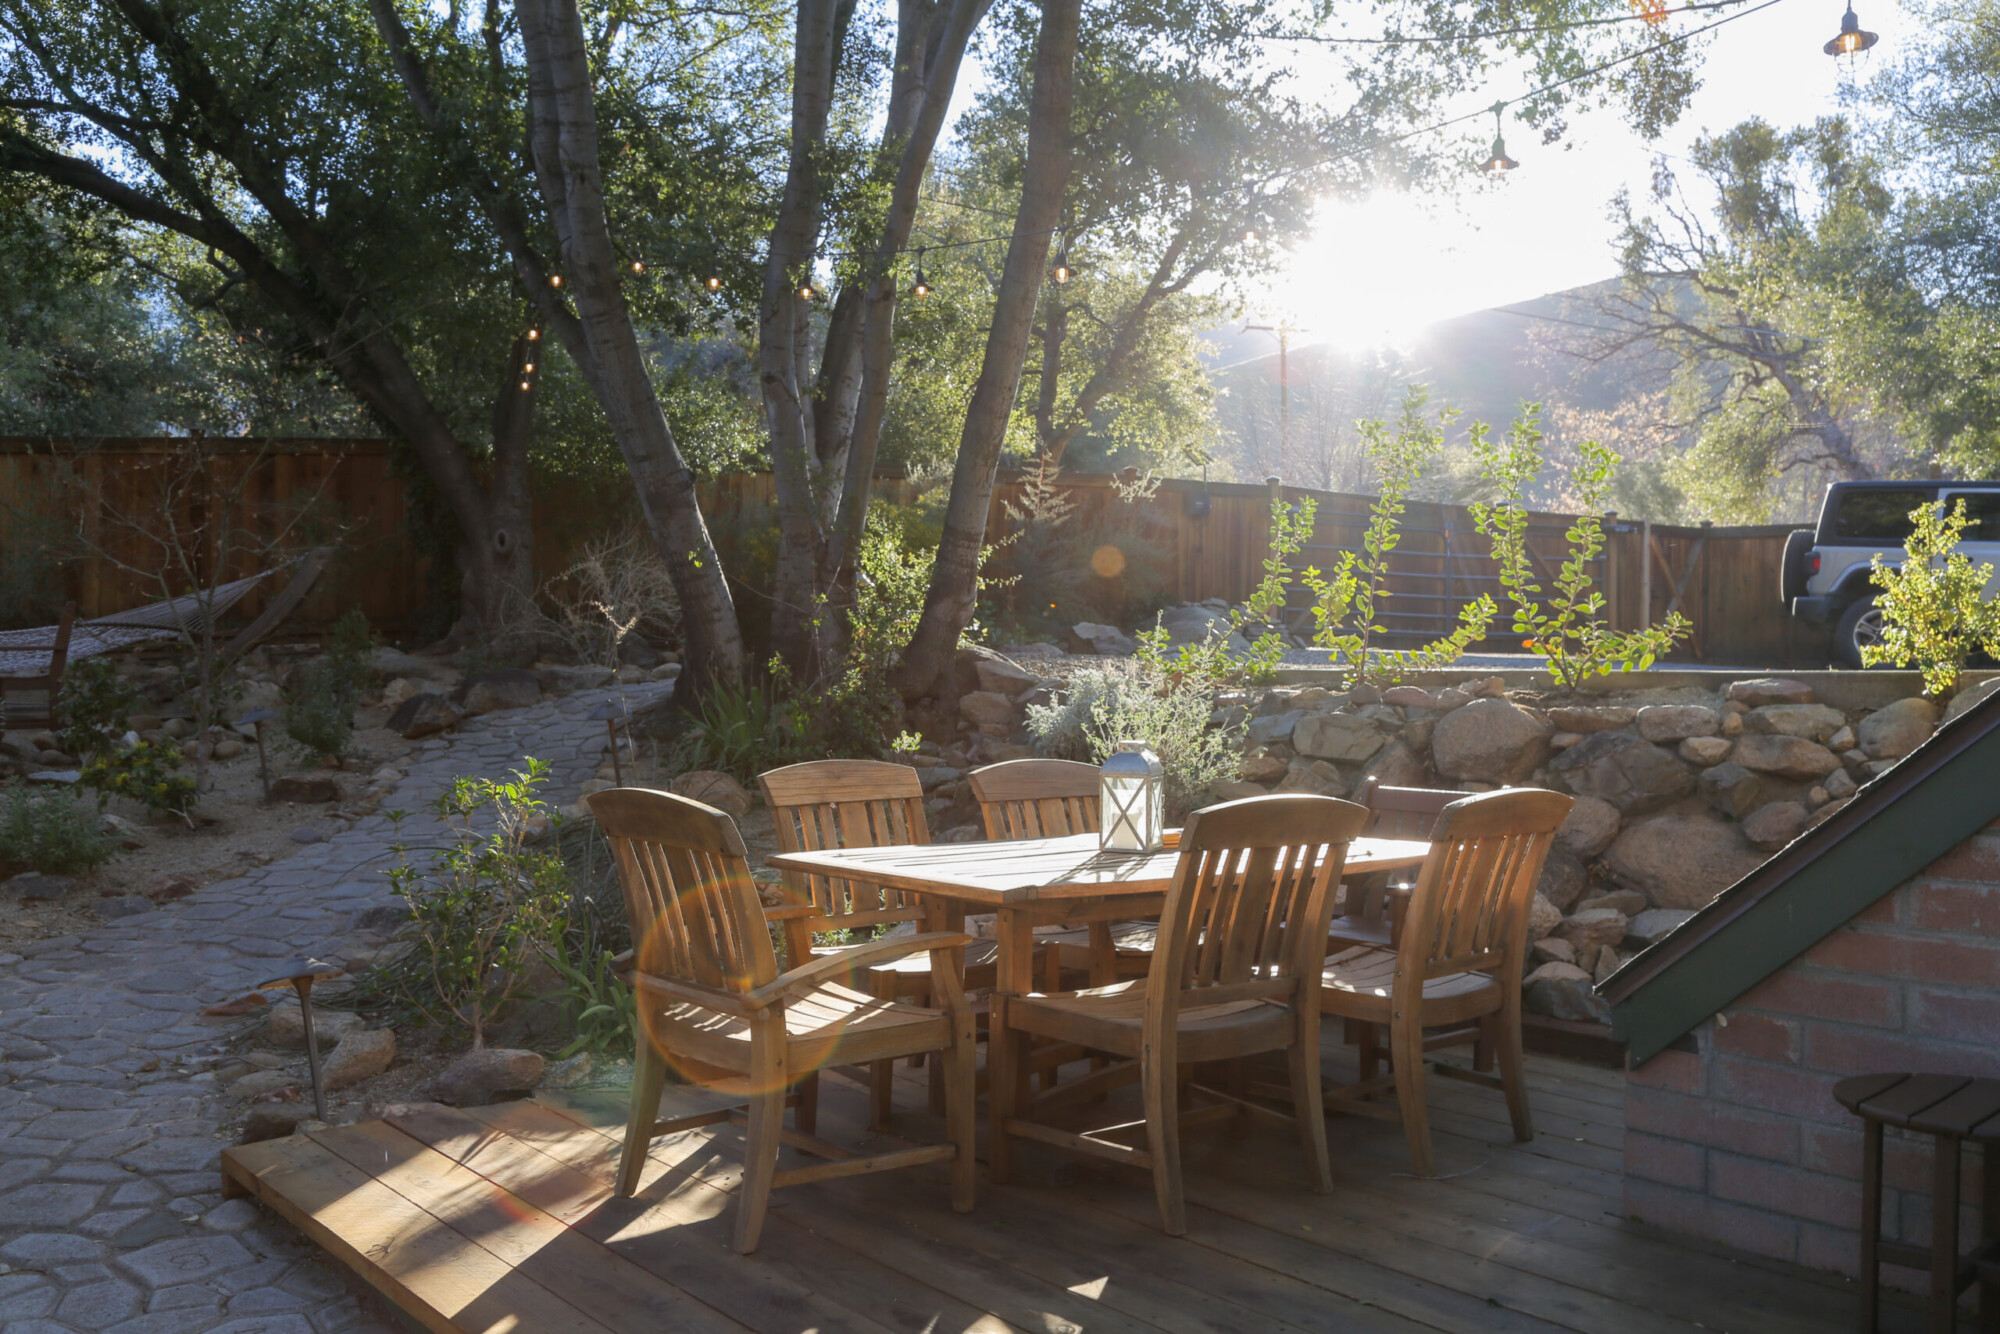 View of a wood dining table for six on a wooden platform set among some trees at Kern River House's River Willow Cabin in Kernville, California.